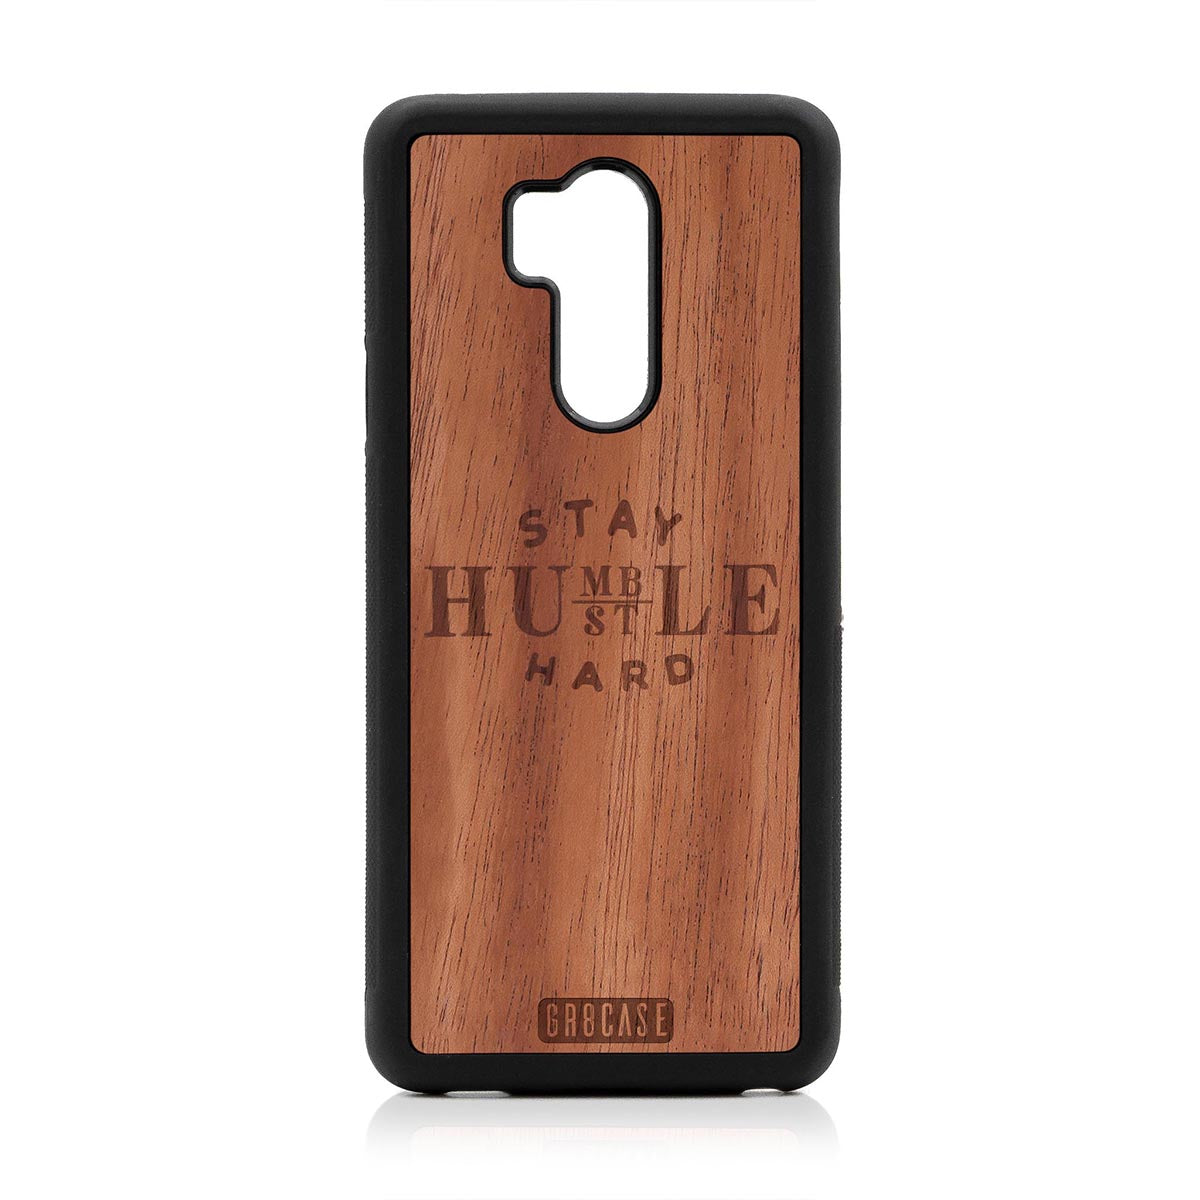 Stay Humble Hustle Hard Design Wood Case LG G7 ThinQ by GR8CASE